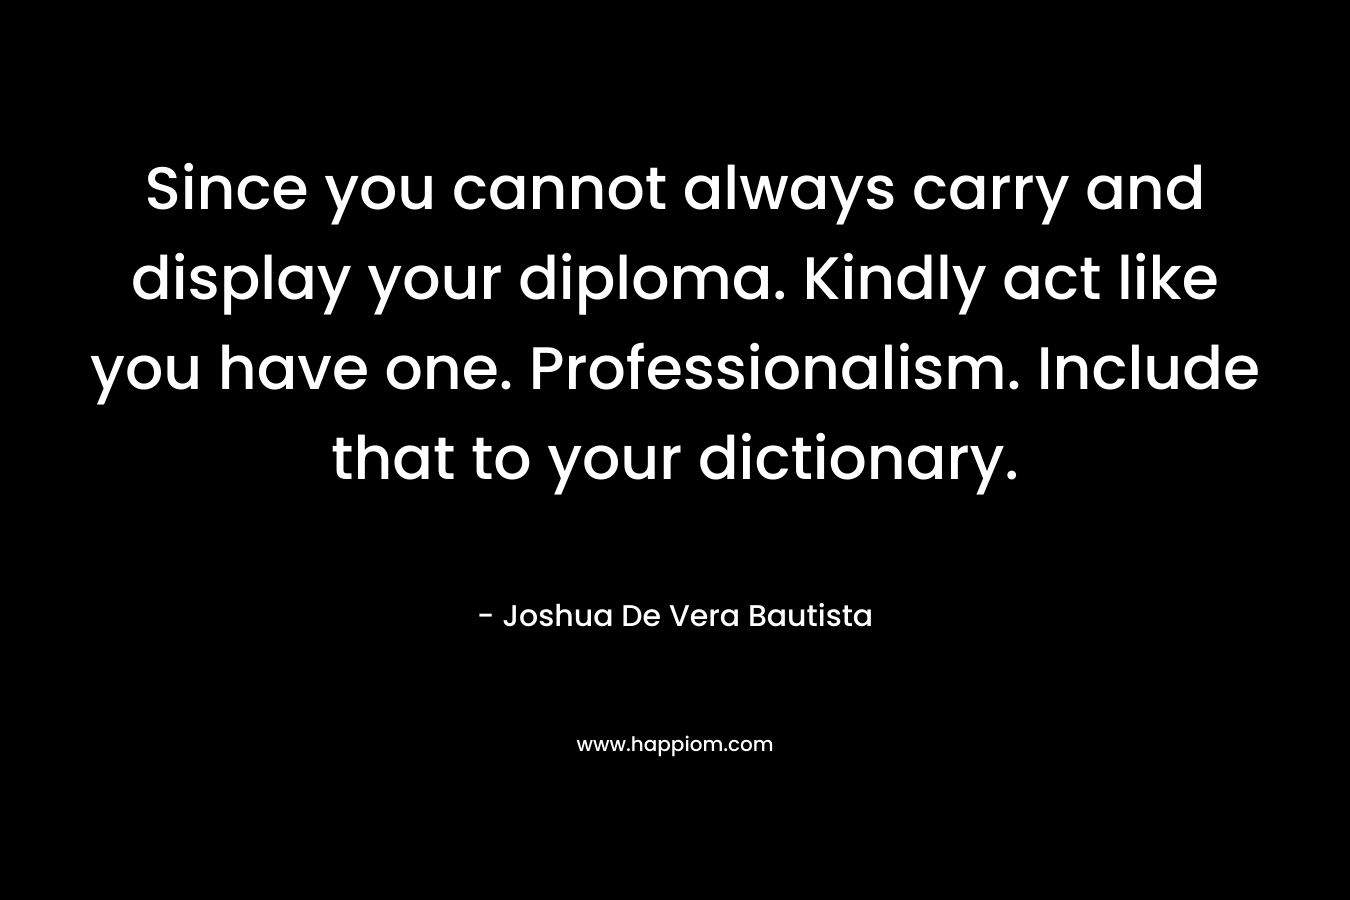 Since you cannot always carry and display your diploma. Kindly act like you have one. Professionalism. Include that to your dictionary. – Joshua De Vera Bautista